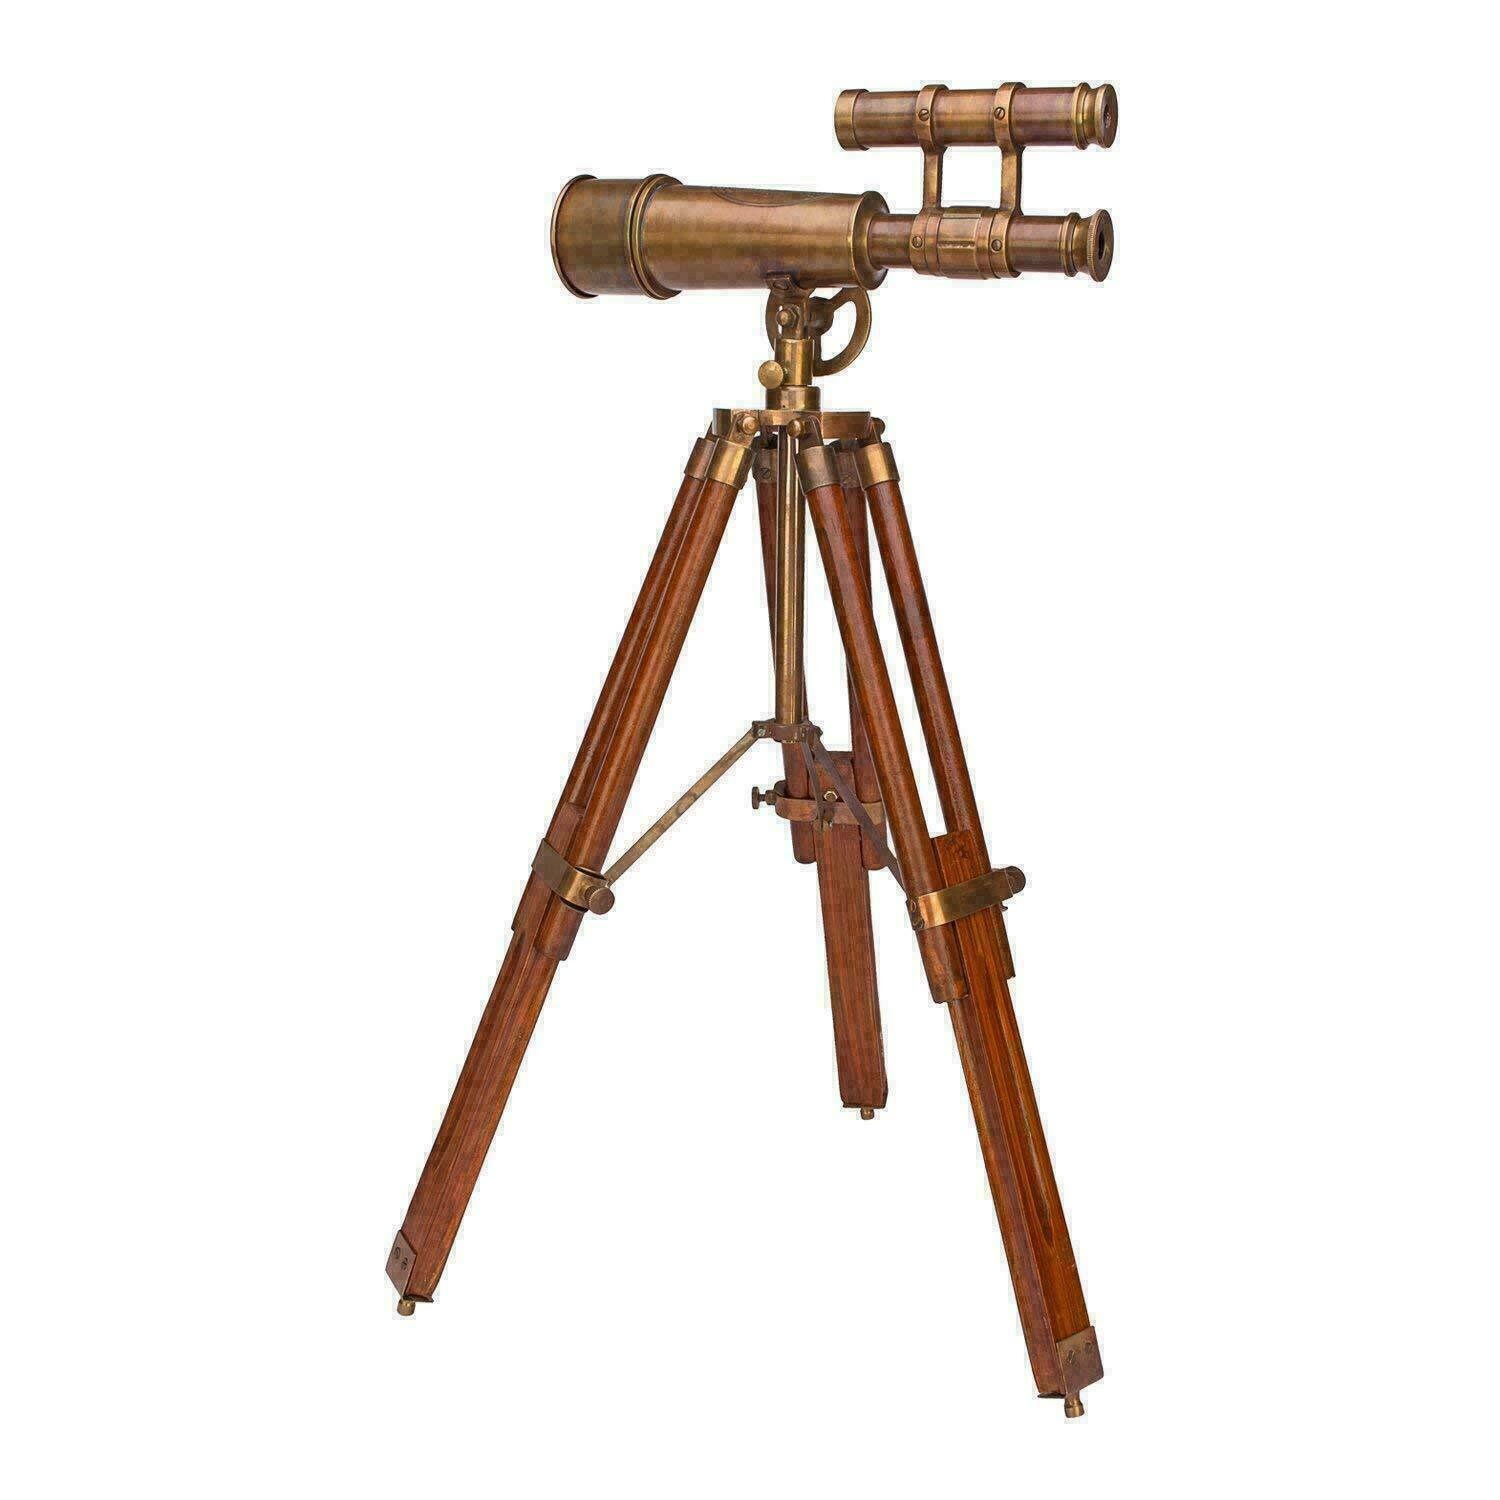 Marine Navy Nautical Brass Telescope With Wooden Tripod Stand 10"s 